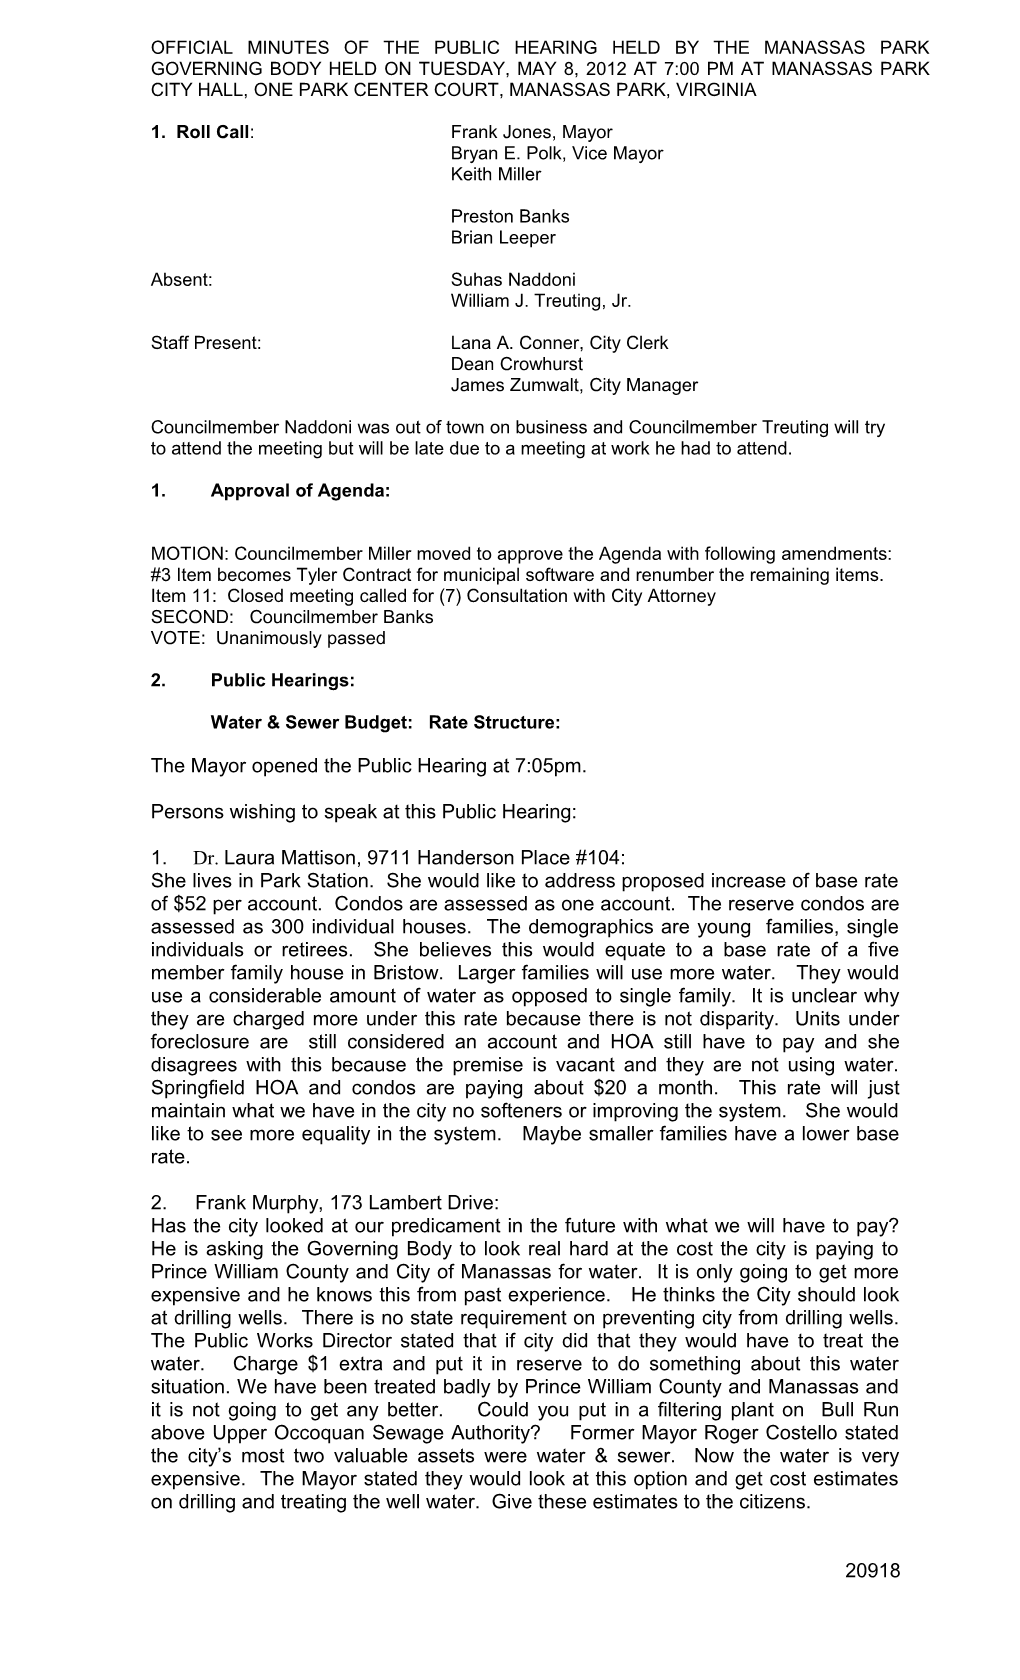 Official Minutes of the Manassas Park Governing Body Meeting Held on Tuesday May 8, 2007 s1